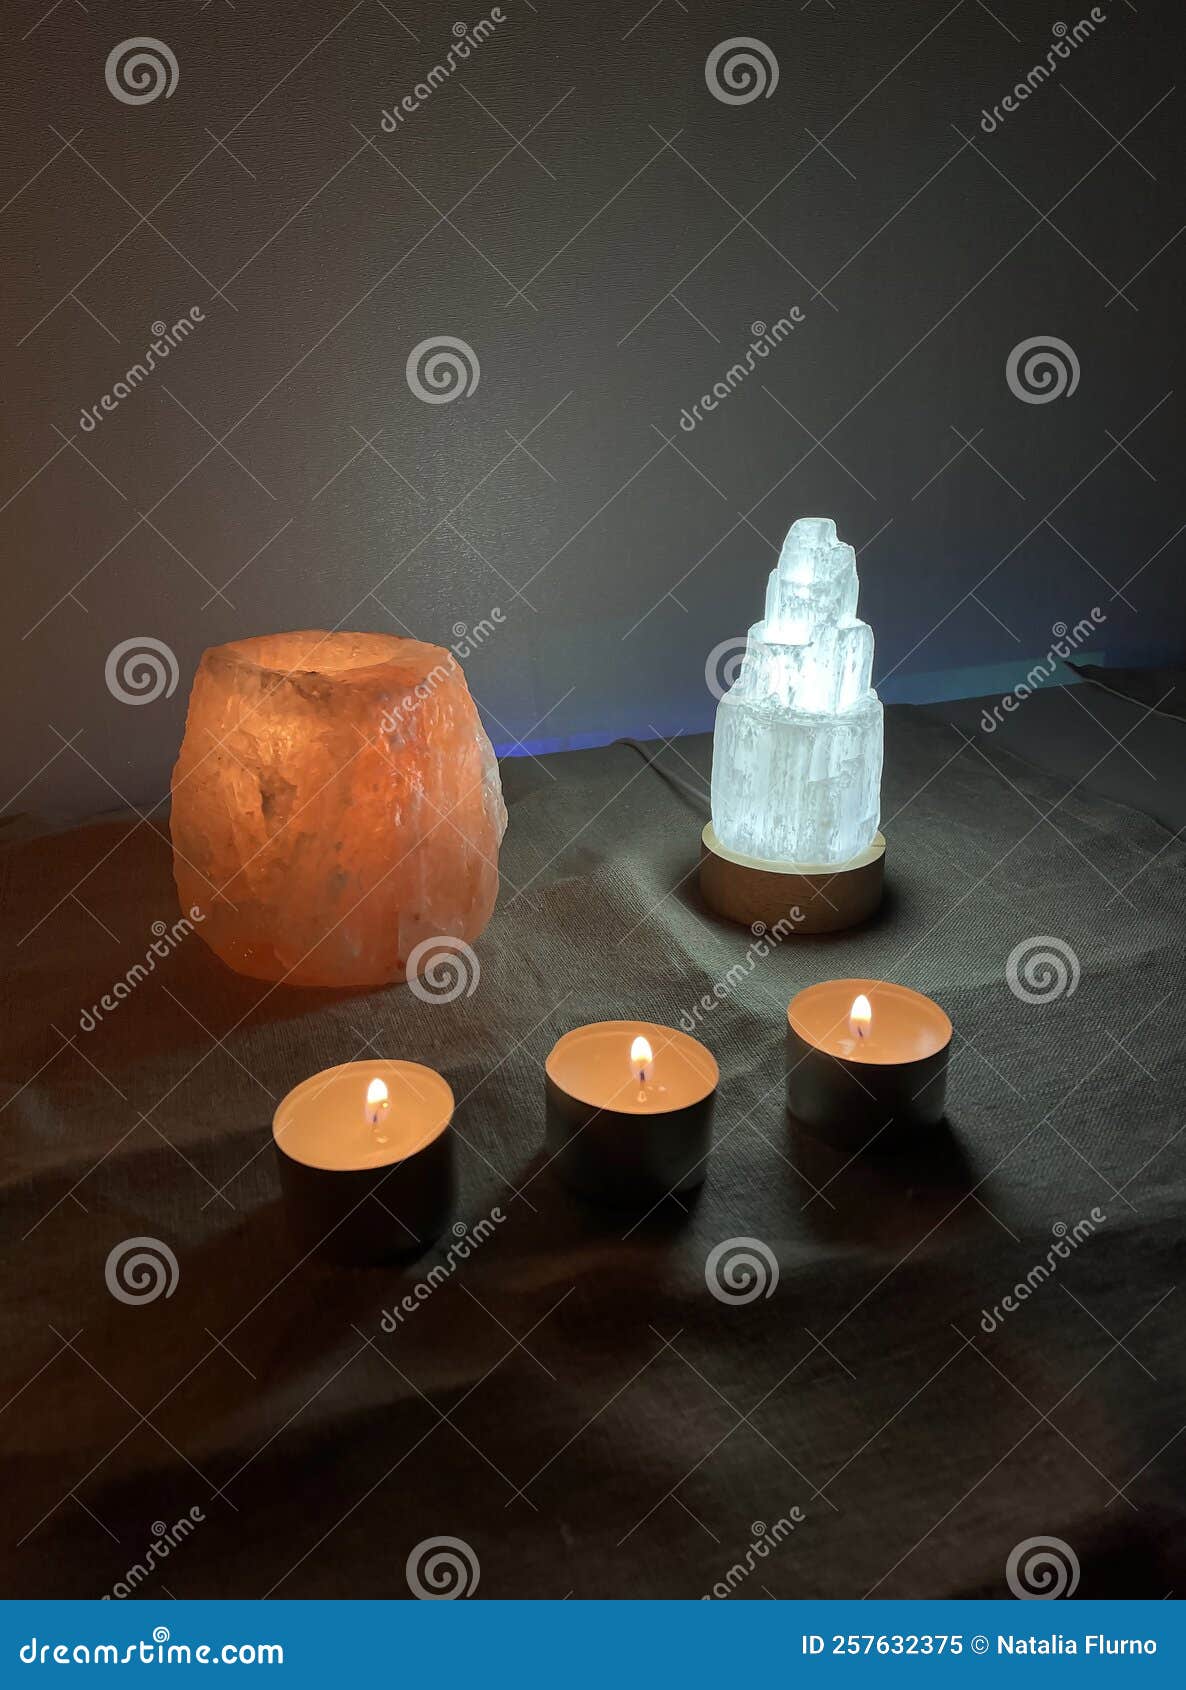 background ritual healing, crystals, stones, candles